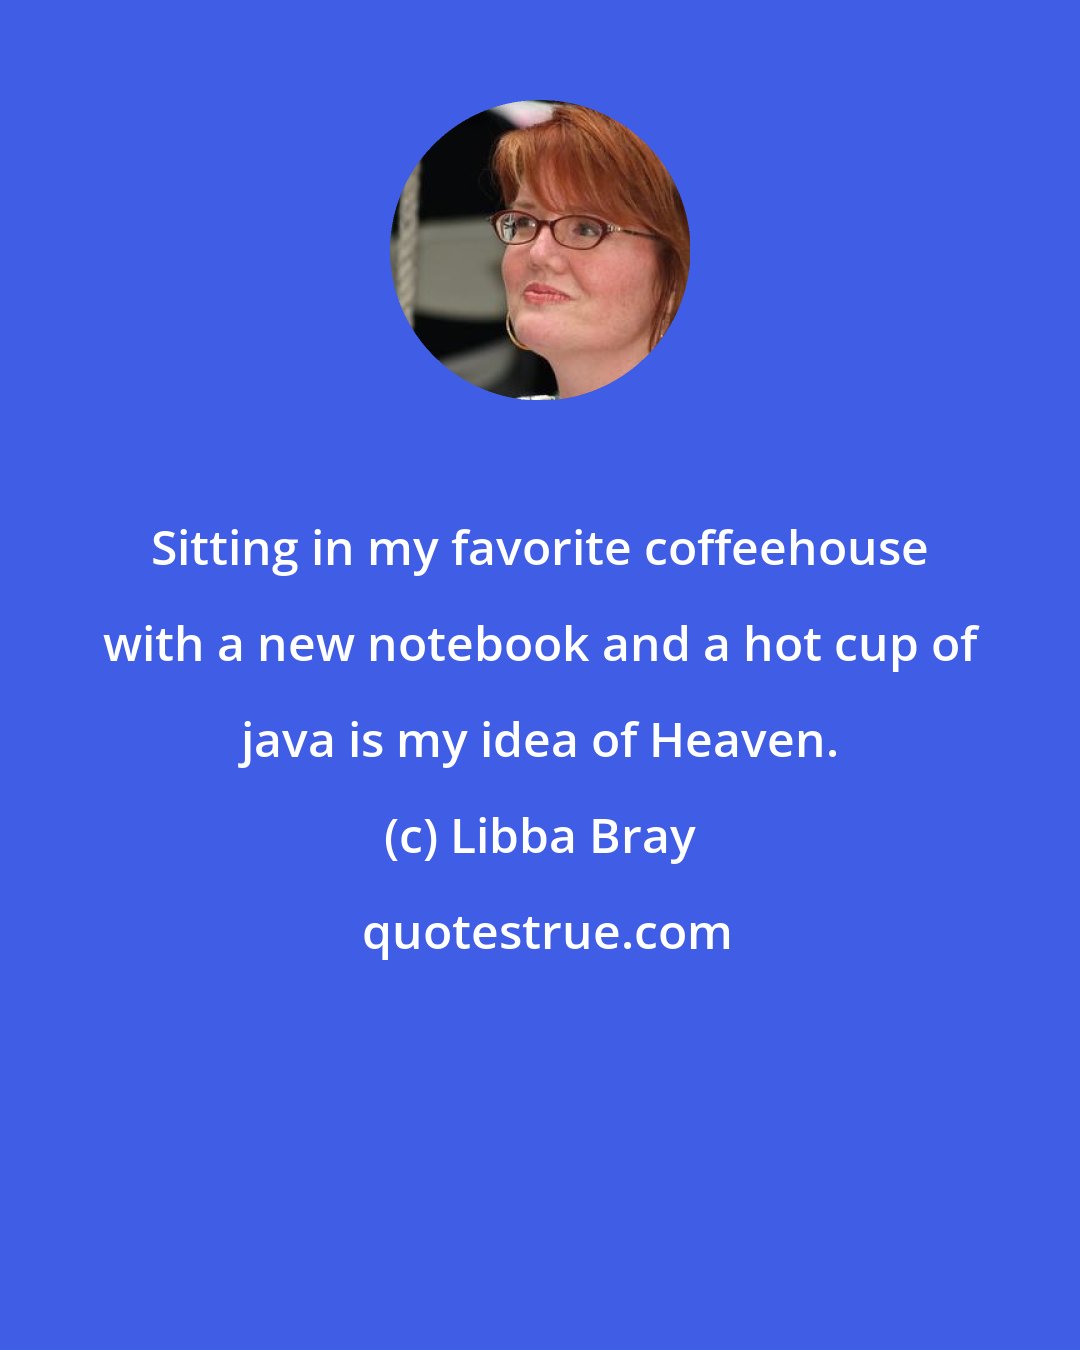 Libba Bray: Sitting in my favorite coffeehouse with a new notebook and a hot cup of java is my idea of Heaven.